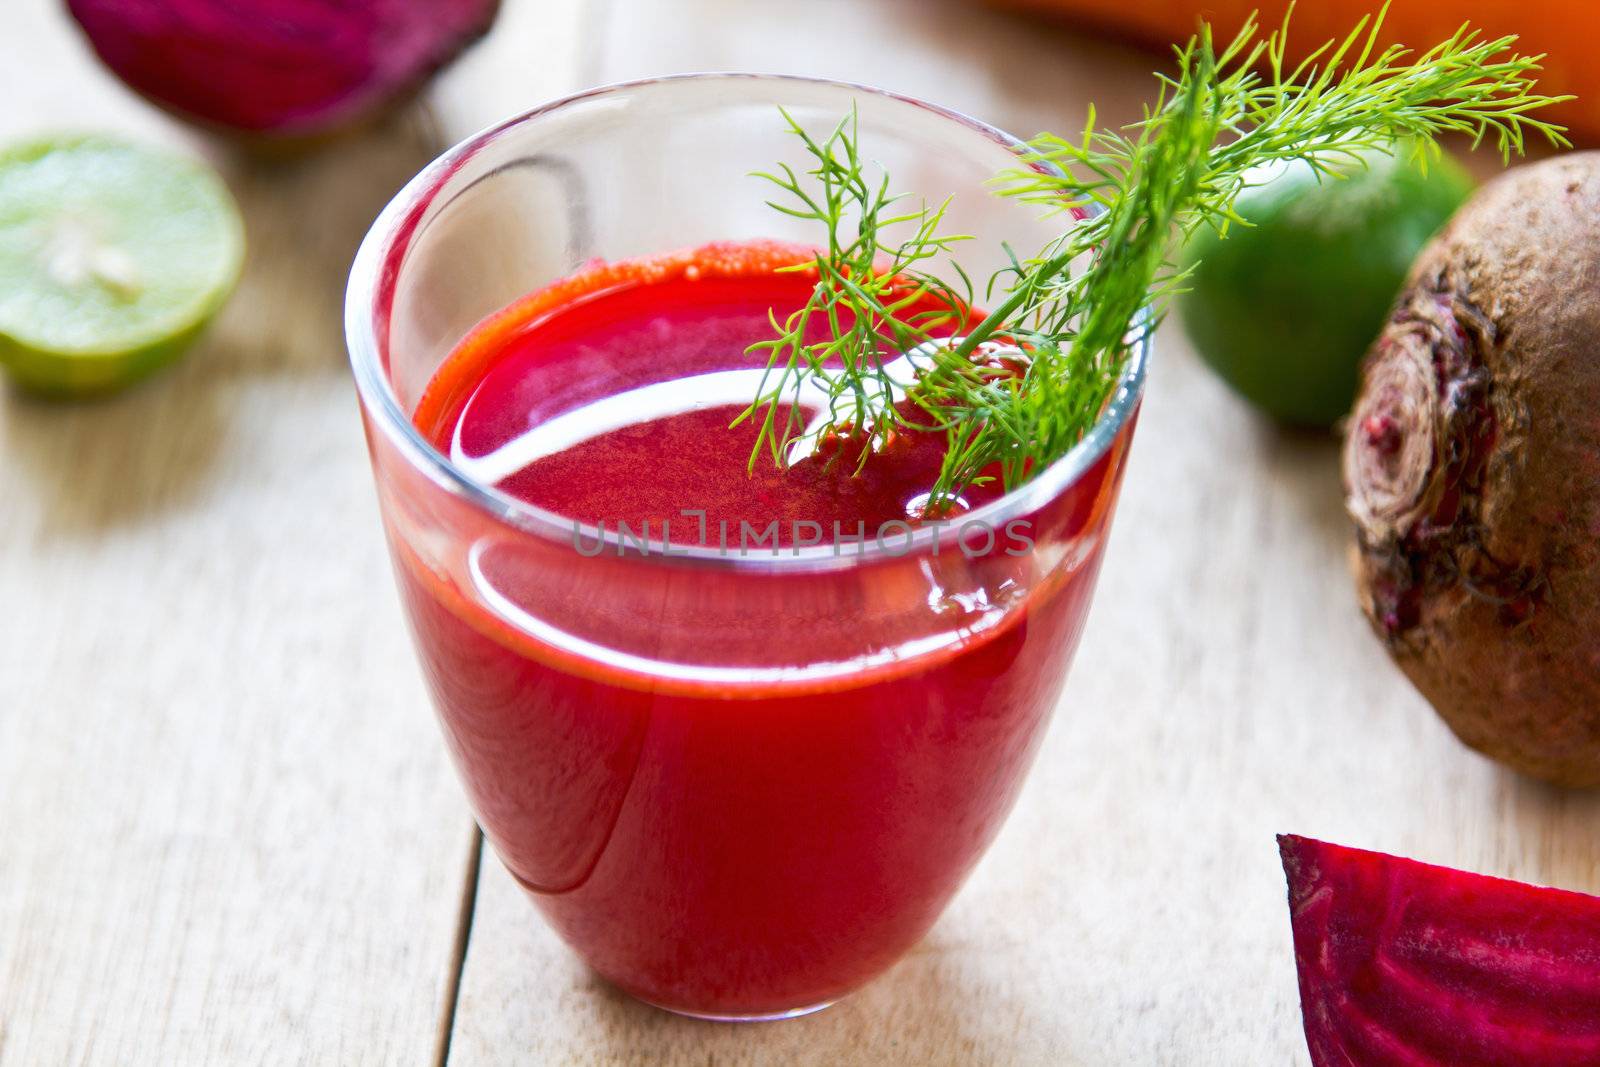 Beetroot with Carrot and lime juice